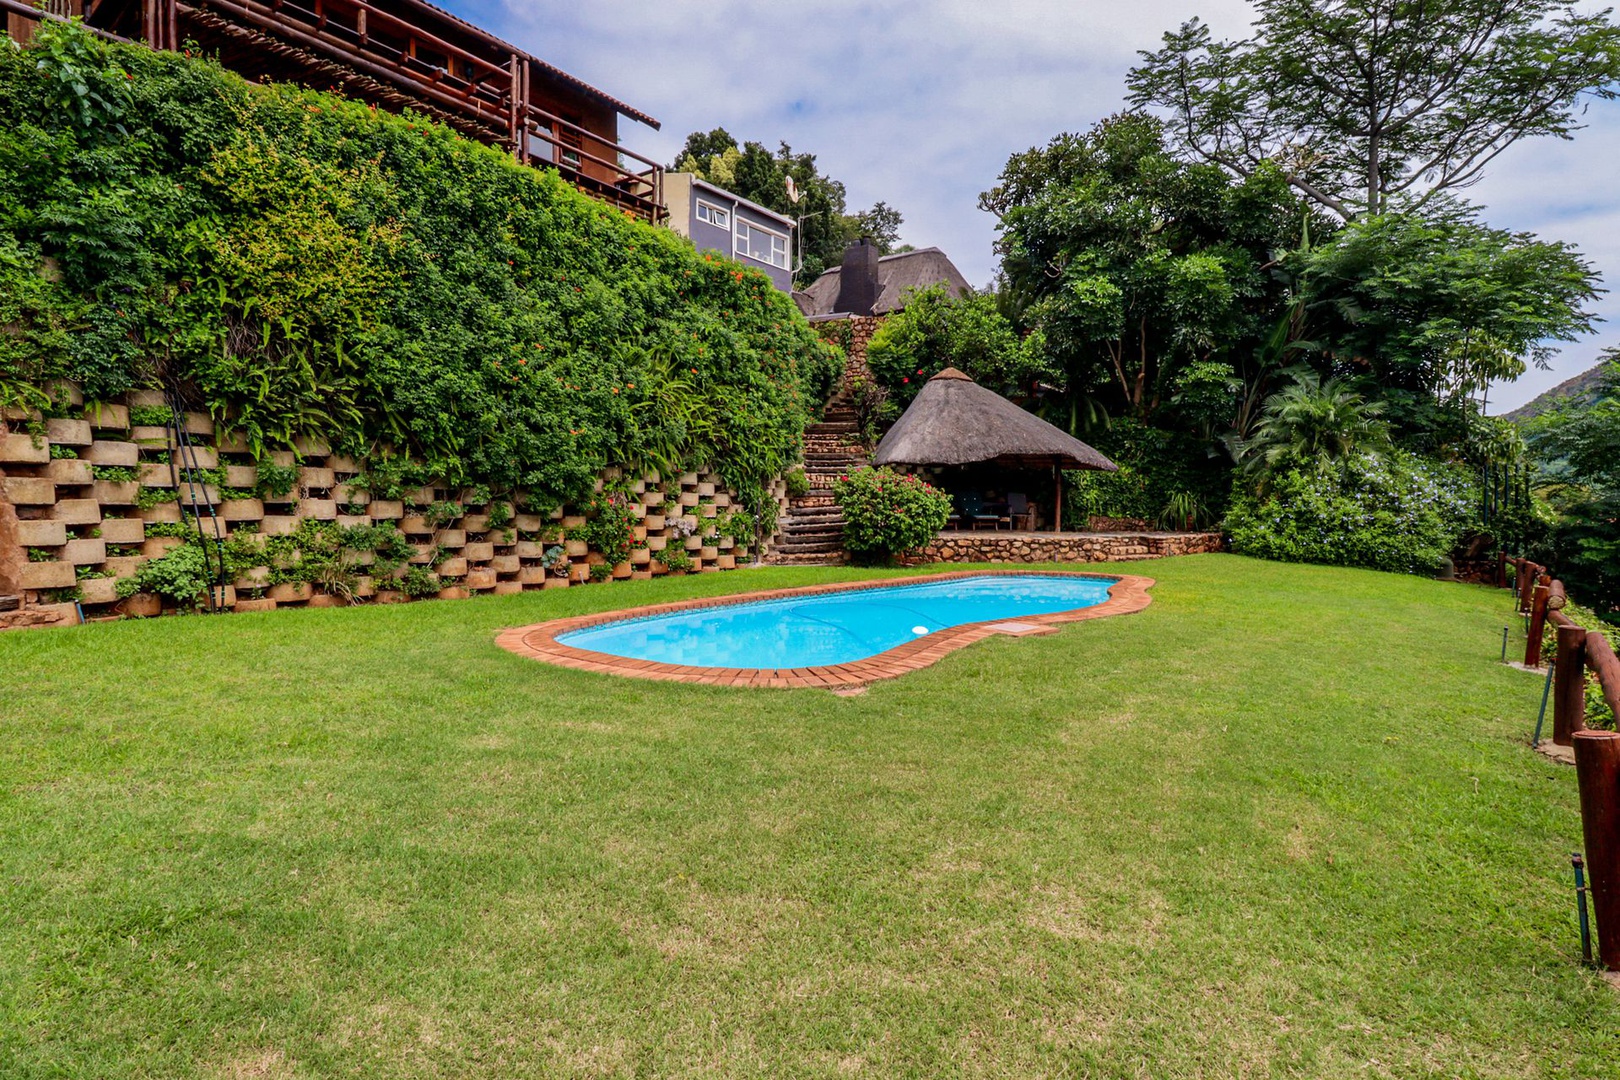 House in Kosmos - Pool is a good size, with lawns and lapa